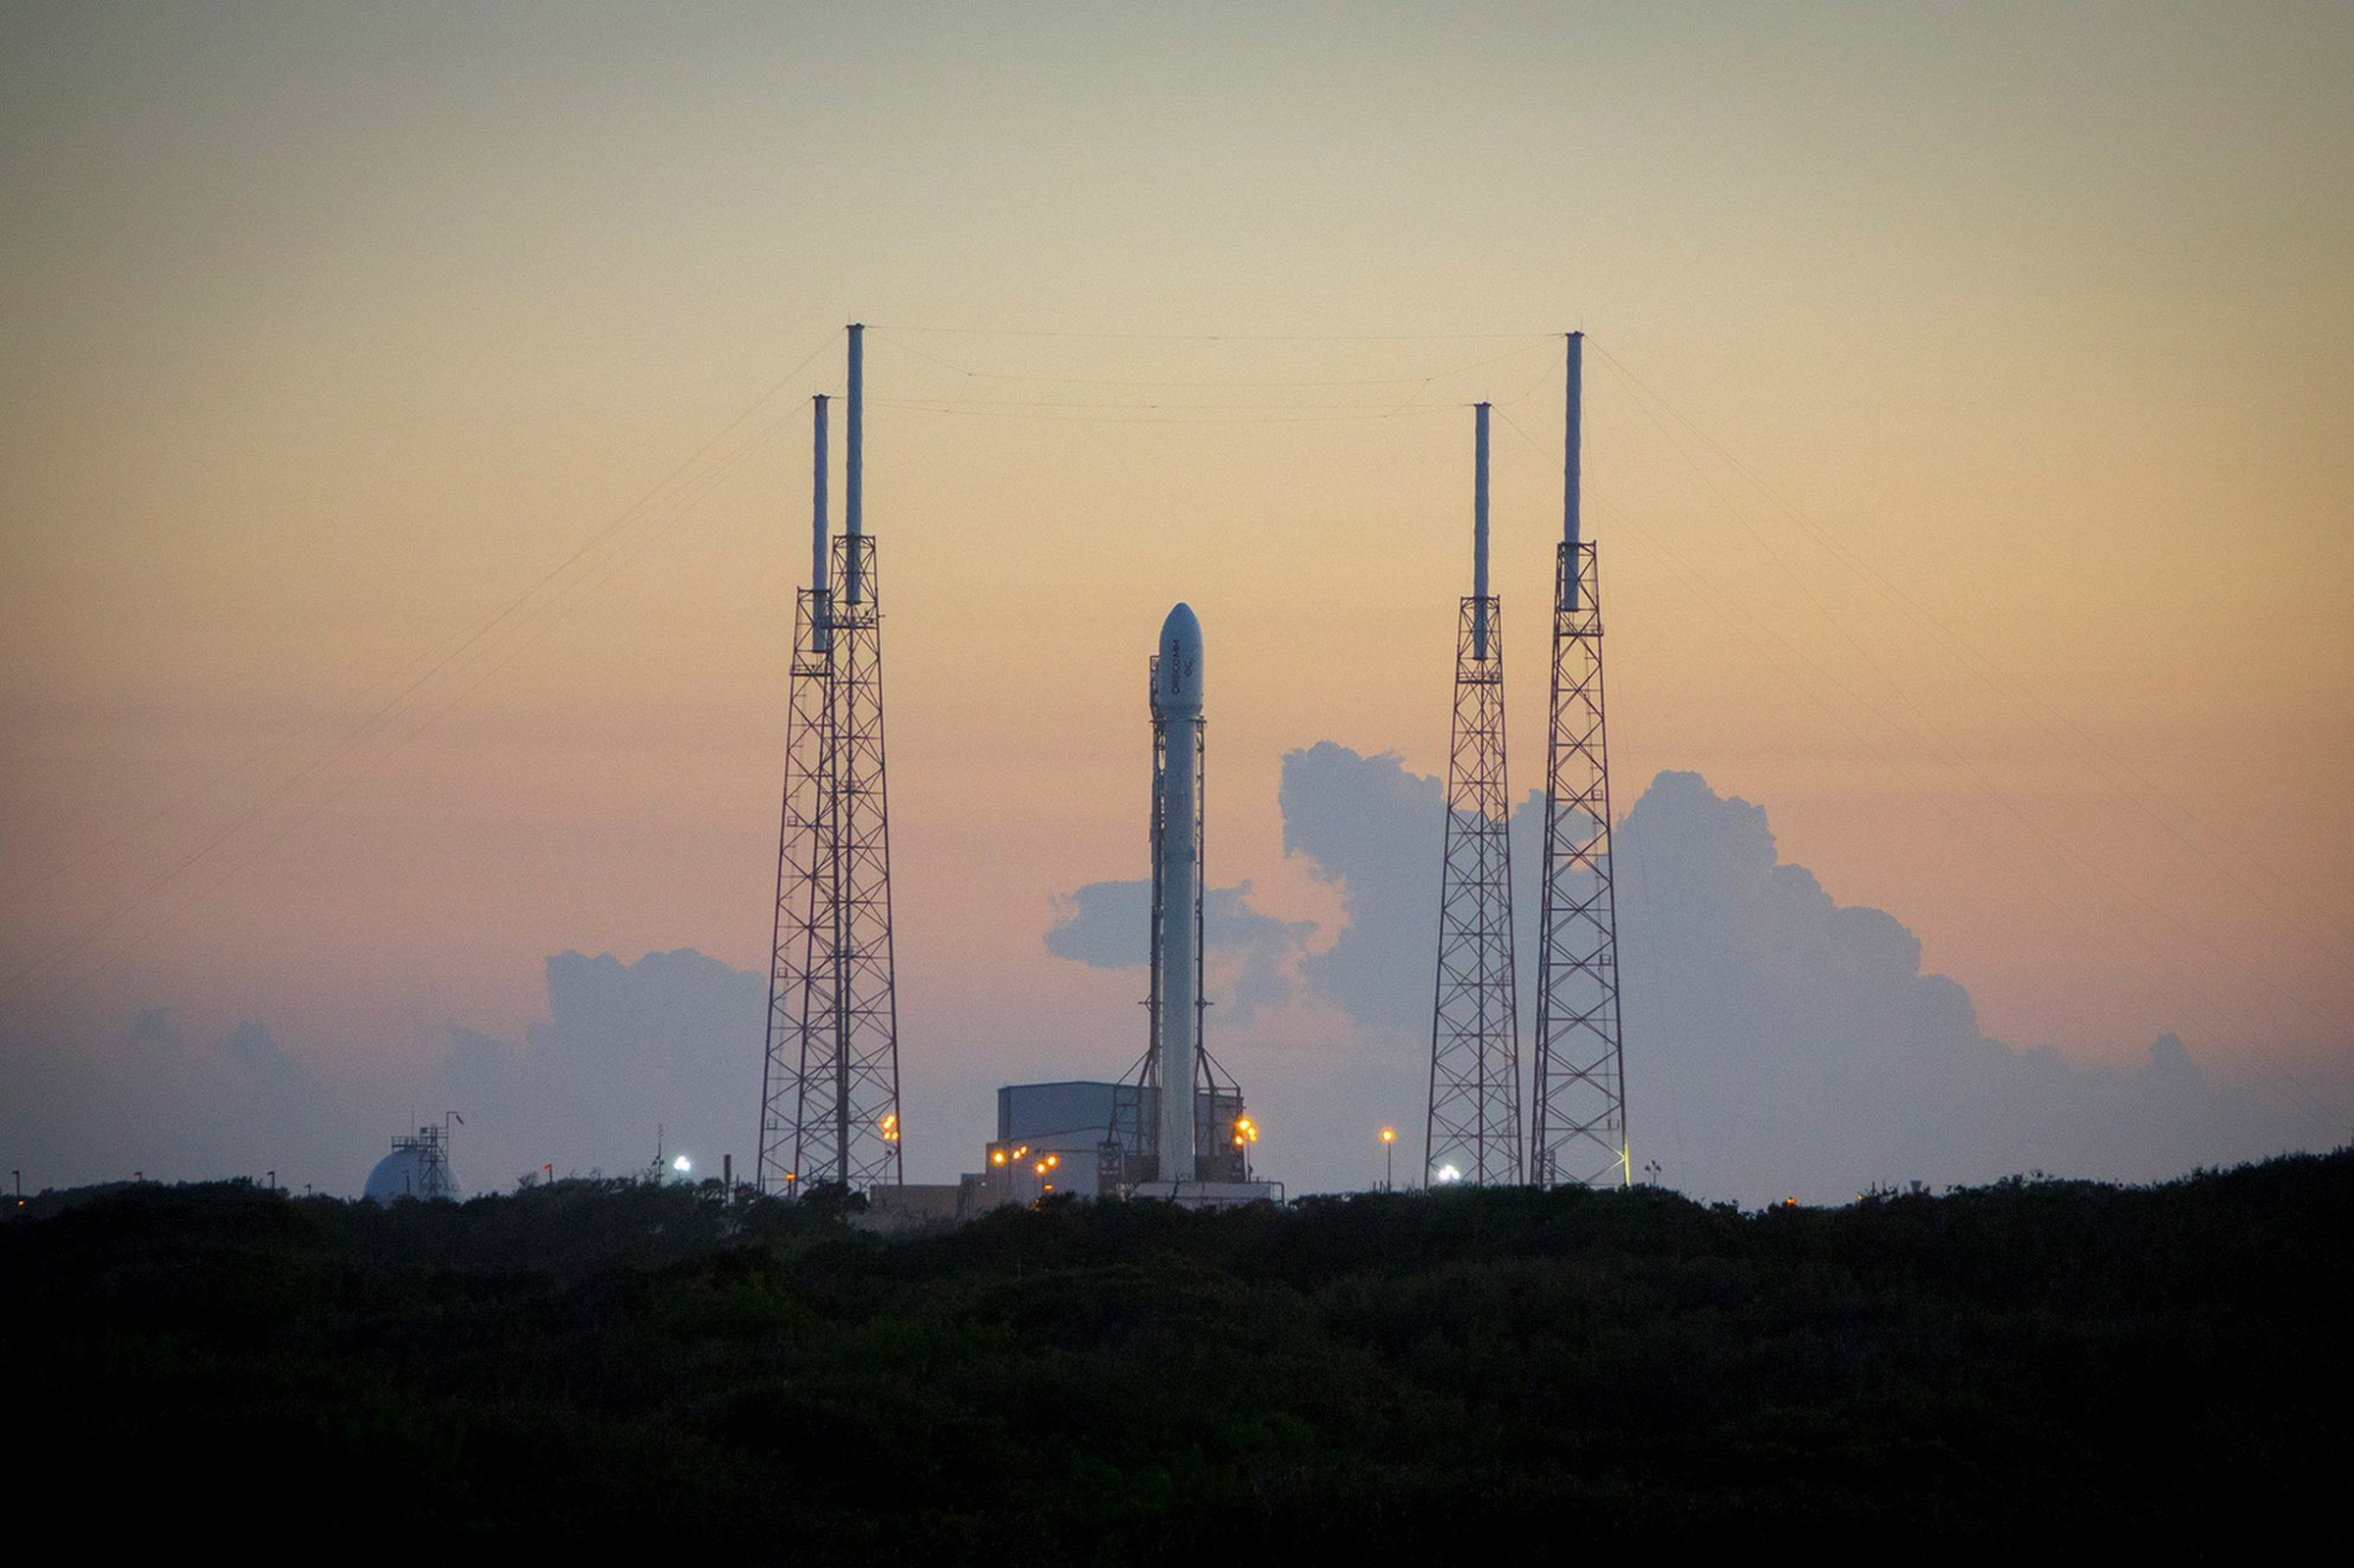 This photo obtained from SpaceX on December 20, 2015 shows the Falcon 9 rocket on December 16, 2015. SpaceX on December 20, 2015 counted down to its first rocket launch since an explosion after liftoff destroyed its unmanned Dragon cargo ship bound for the International Space Station six months ago.The Falcon 9 rocket is poised to launch at 8:29 pm (0129 GMT Monday) from Cape Canaveral, Florida, announced the California-based company headed by Internet tycoon Elon Musk. After launch, SpaceX will attempt to land the first stage of its Falcon 9 rocket in an upright position on solid ground for the first time, a milestone it sees as key on the path toward making rockets as reusable as commercial airplanes one day. AFP PHOTO/SPACEX/HANDOUT = RESTRICTED TO EDITORIAL USE†- MANDATORY CREDIT "AFP PHOTO / SPACEX" -†NO MARKETING NO ADVERTISING CAMPAIGNS - DISTRIBUTED AS A SERVICE TO CLIENTS = NO A LA CARTE SALES= HO/AFP/Getty Images